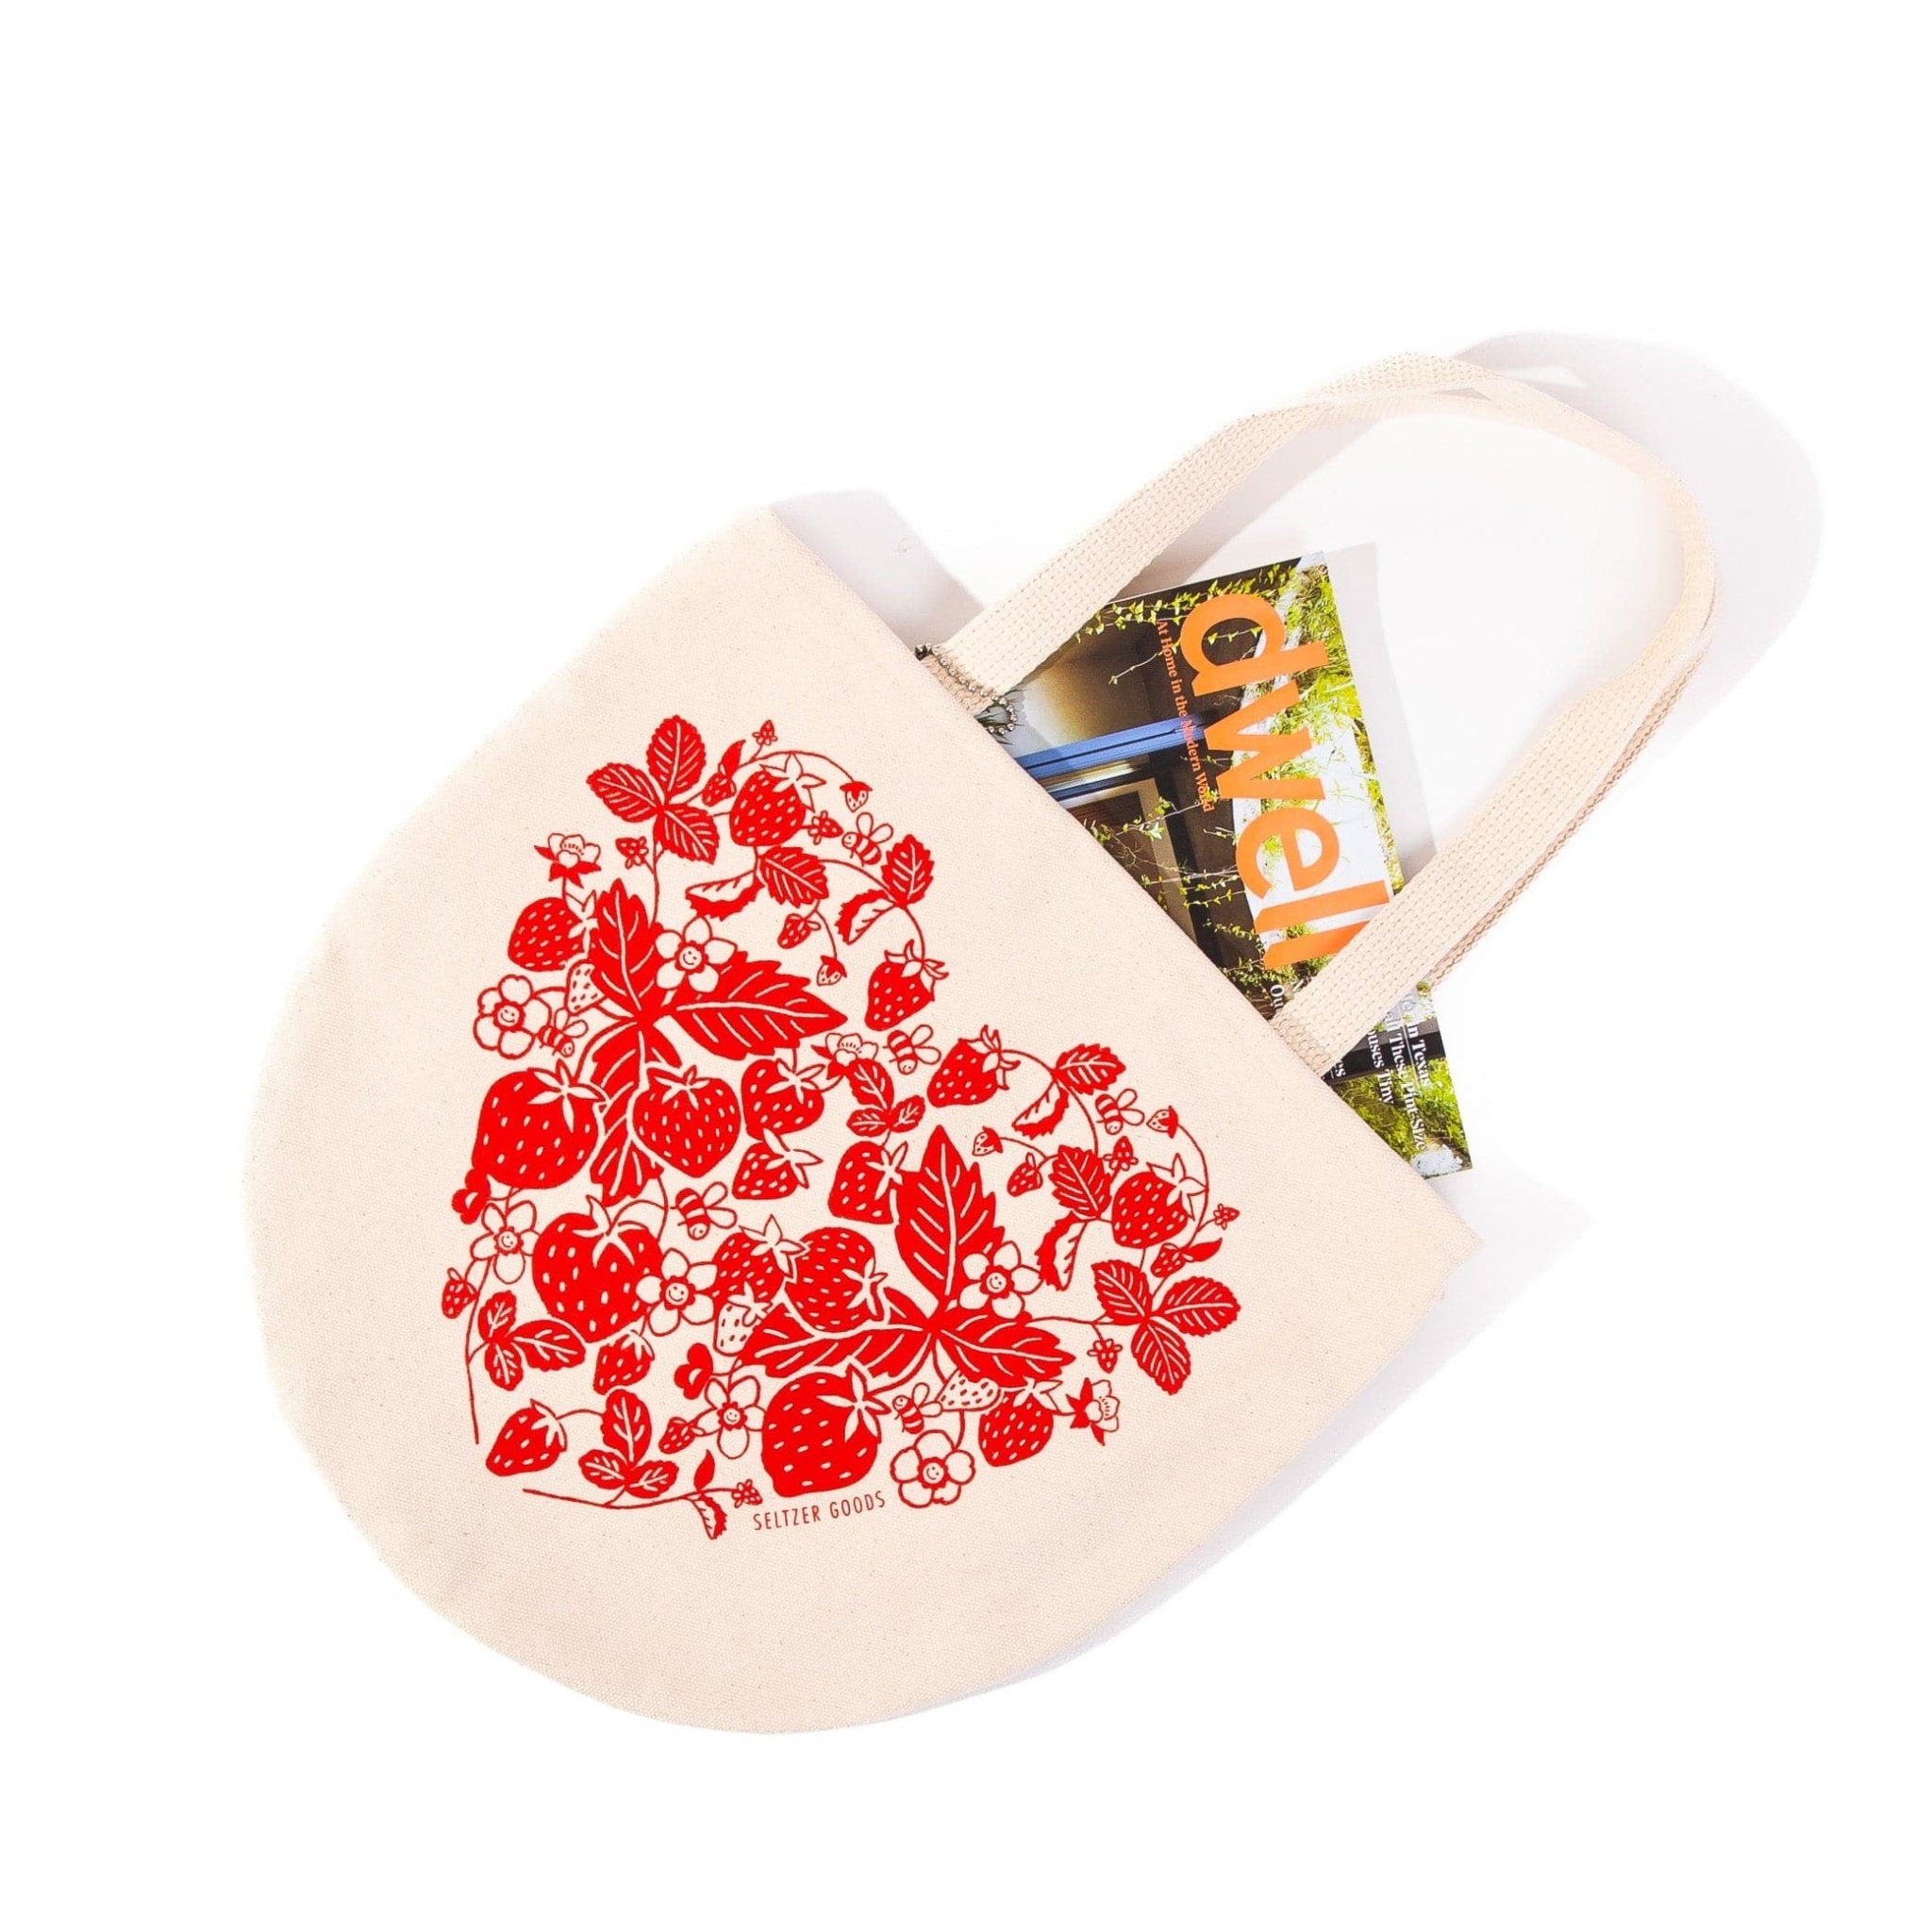 Strawberry Heart Round Canvas Tote - Green Fresh Florals + Plants